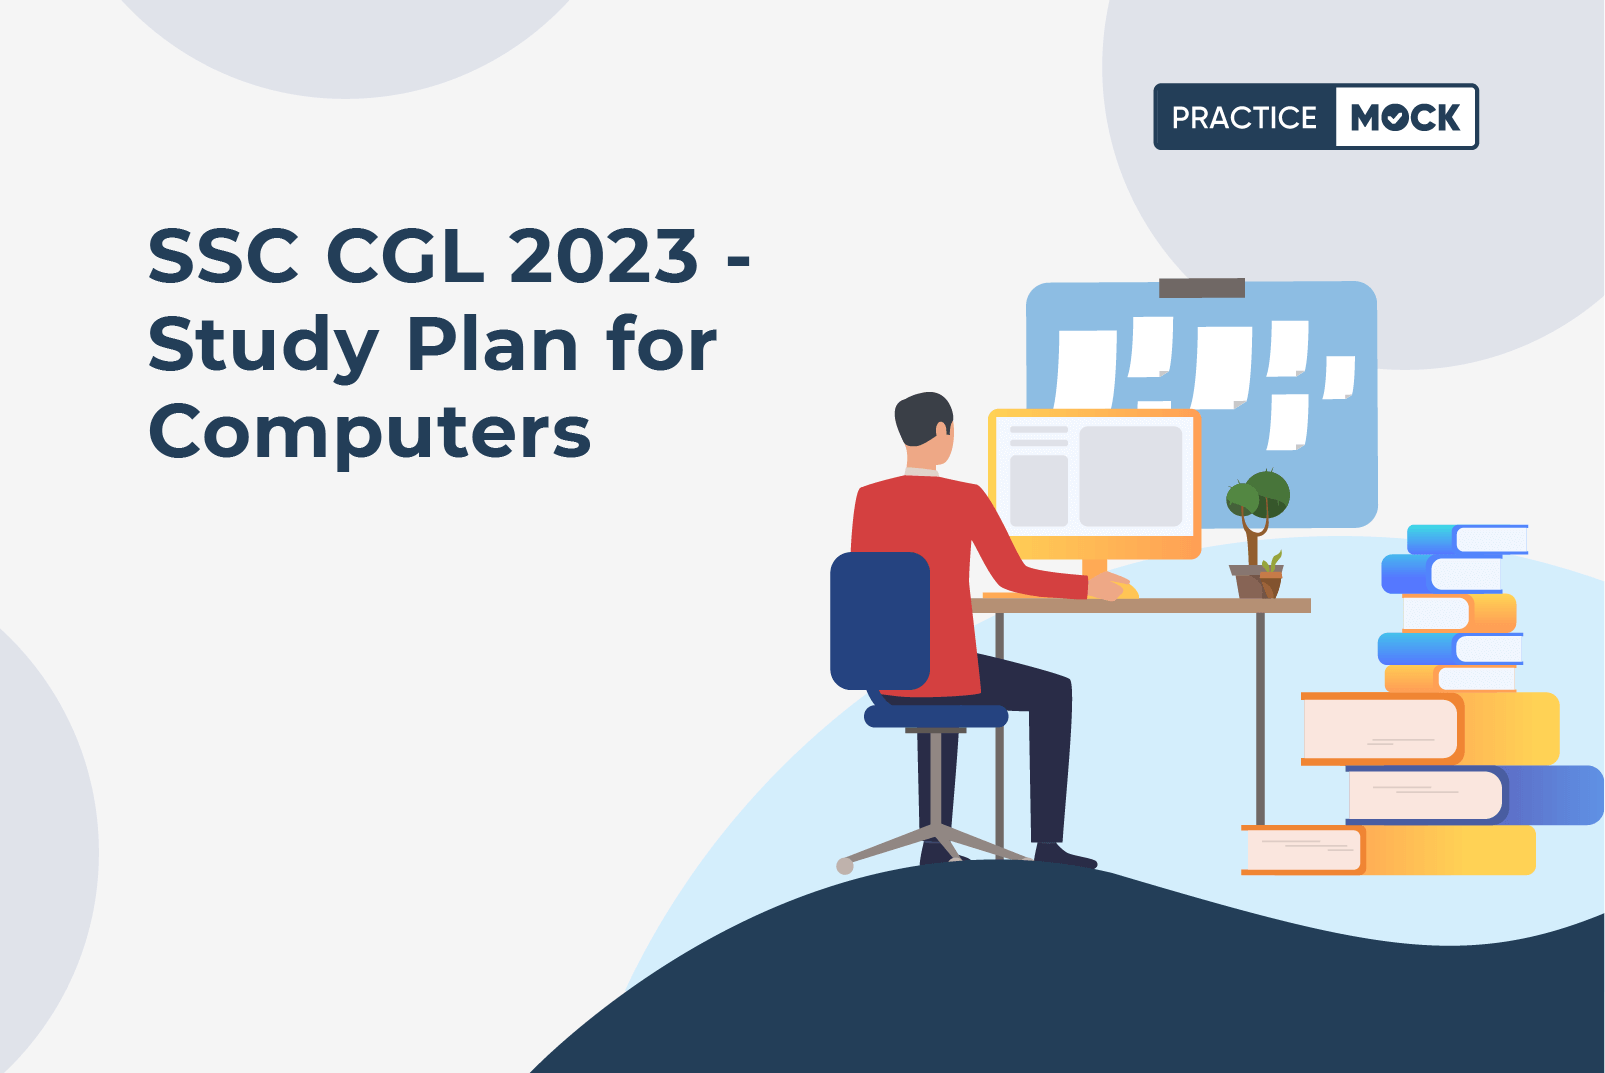 SSC CGL 2023 - Study Plan for Computers